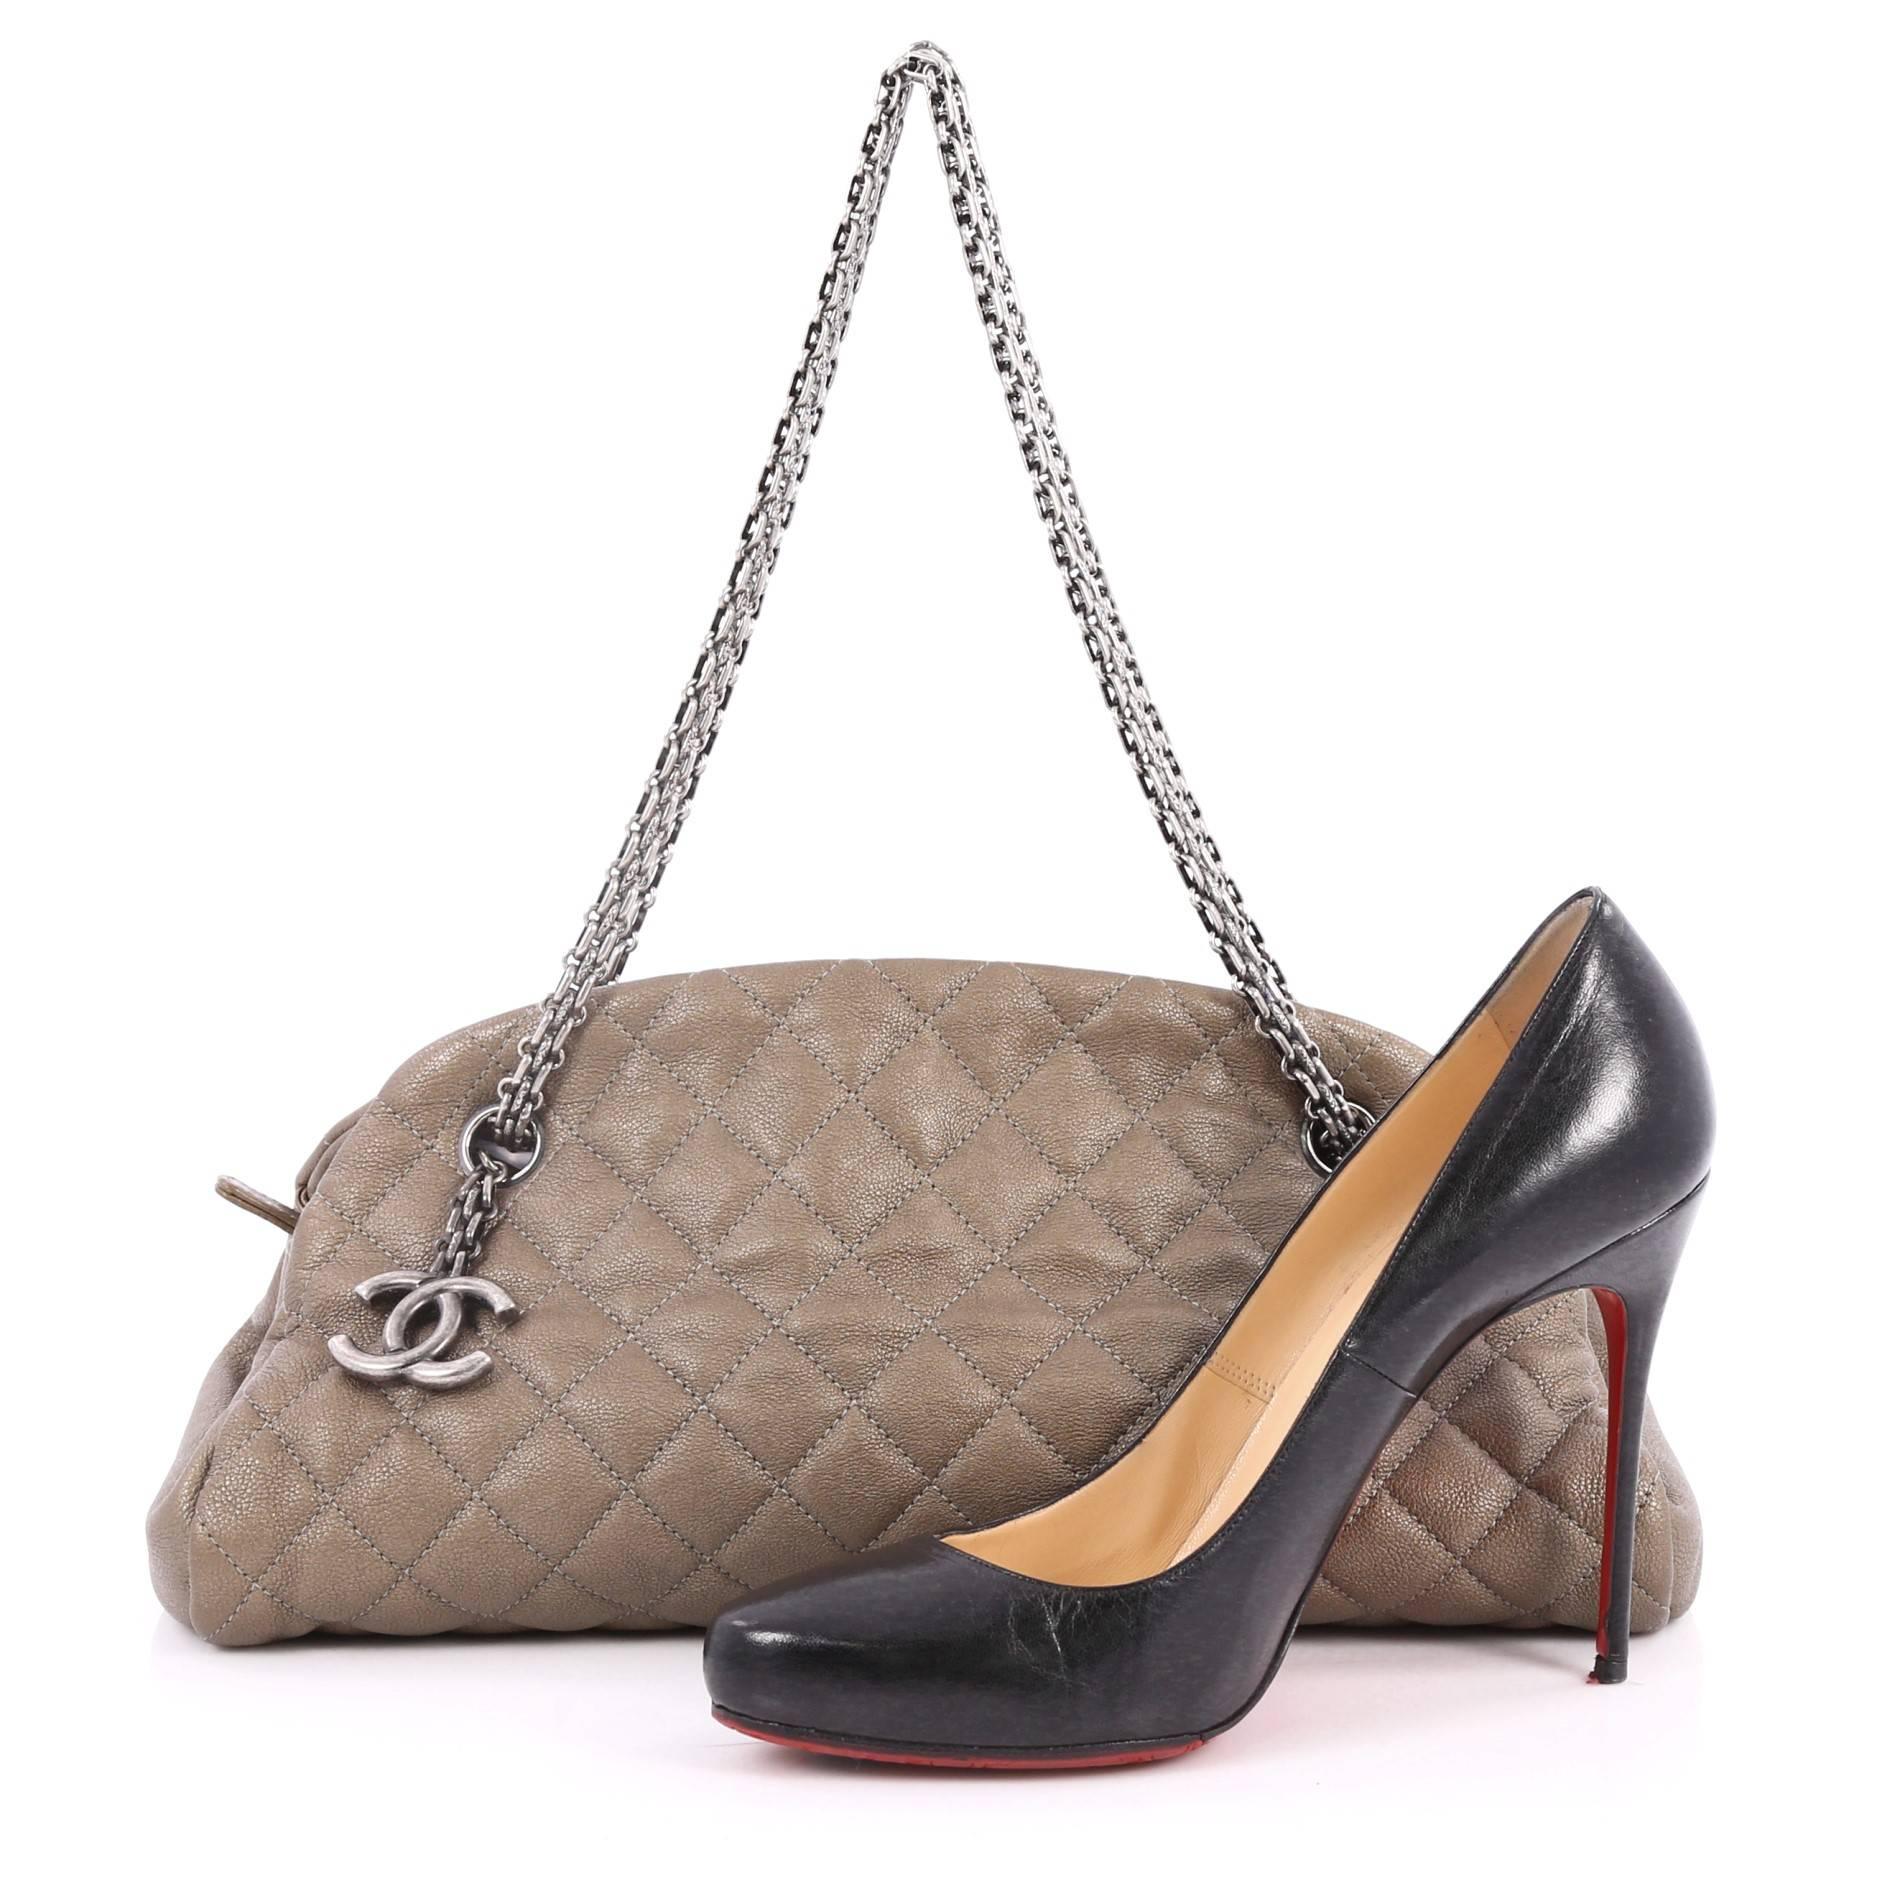 This authentic Chanel Just Mademoiselle Handbag Quilted Calfskin Medium showcases a sleek style that complements any look. Crafted from sumptuous taupe calfskin leather in Chanel's iconic diamond stitch pattern, this bag features Chanel reissue